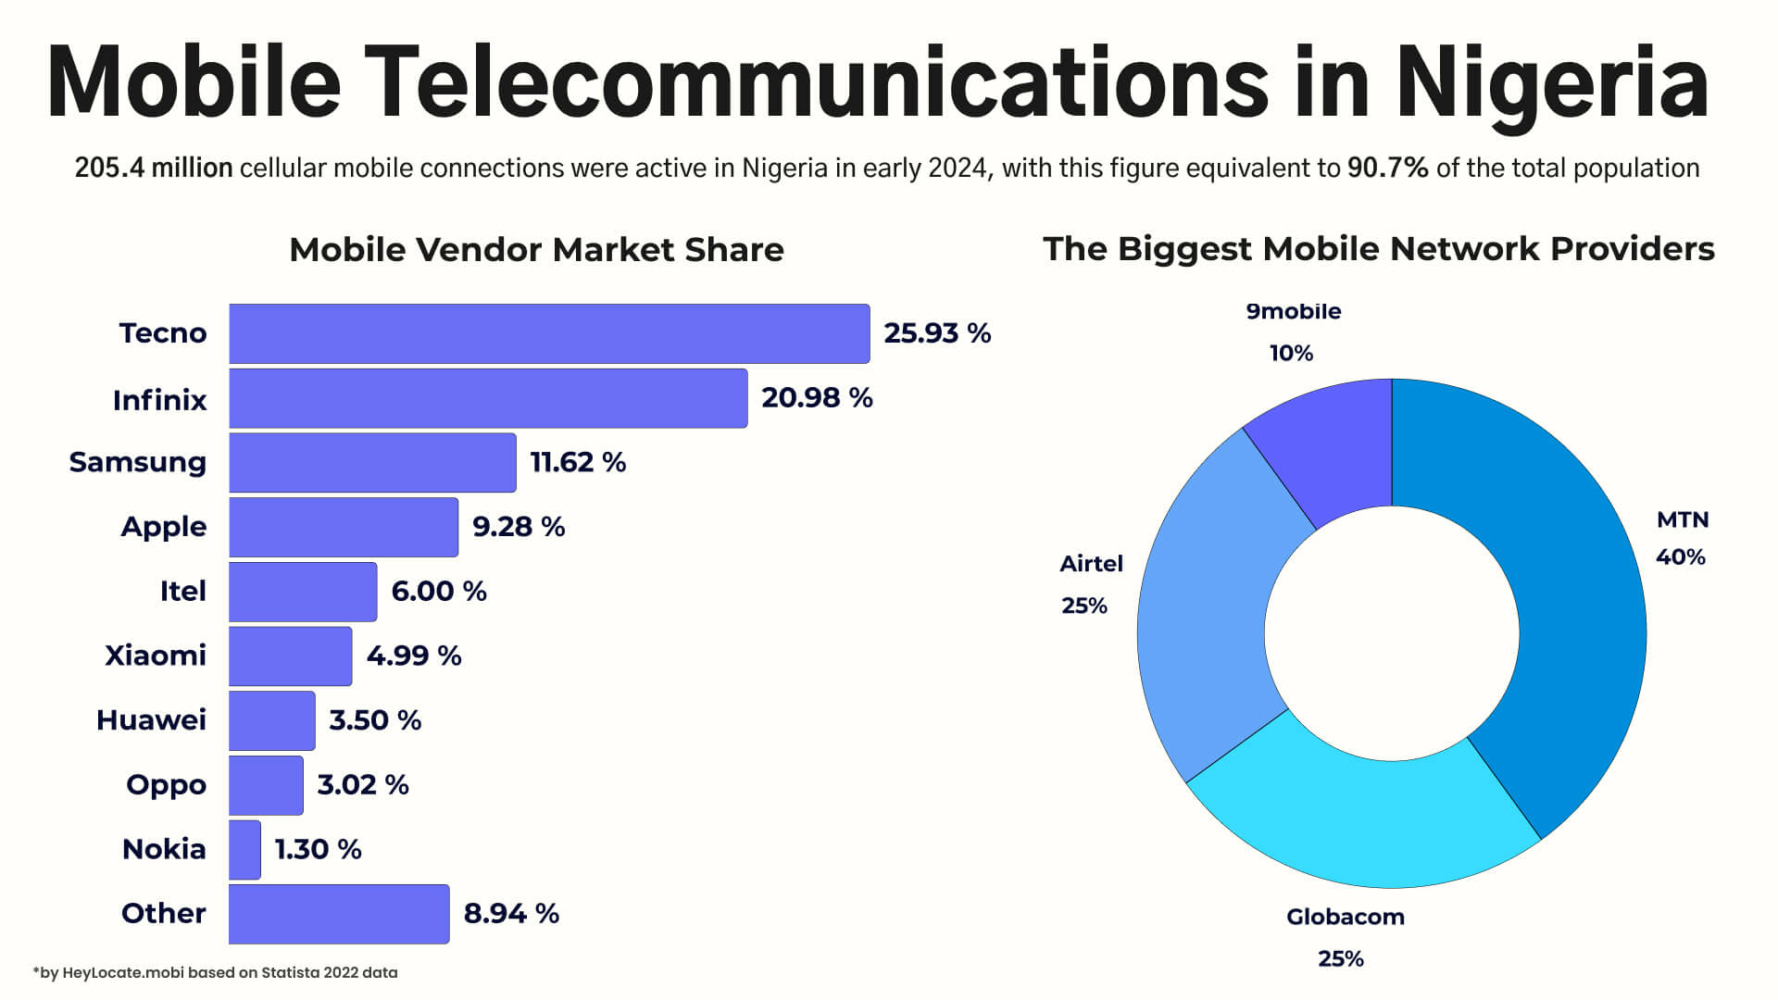 HeyLocate Infographics that shows mobile vendor market share in Nigeria in percentage, as well as Nigeria's biggest mobile network providers diagram